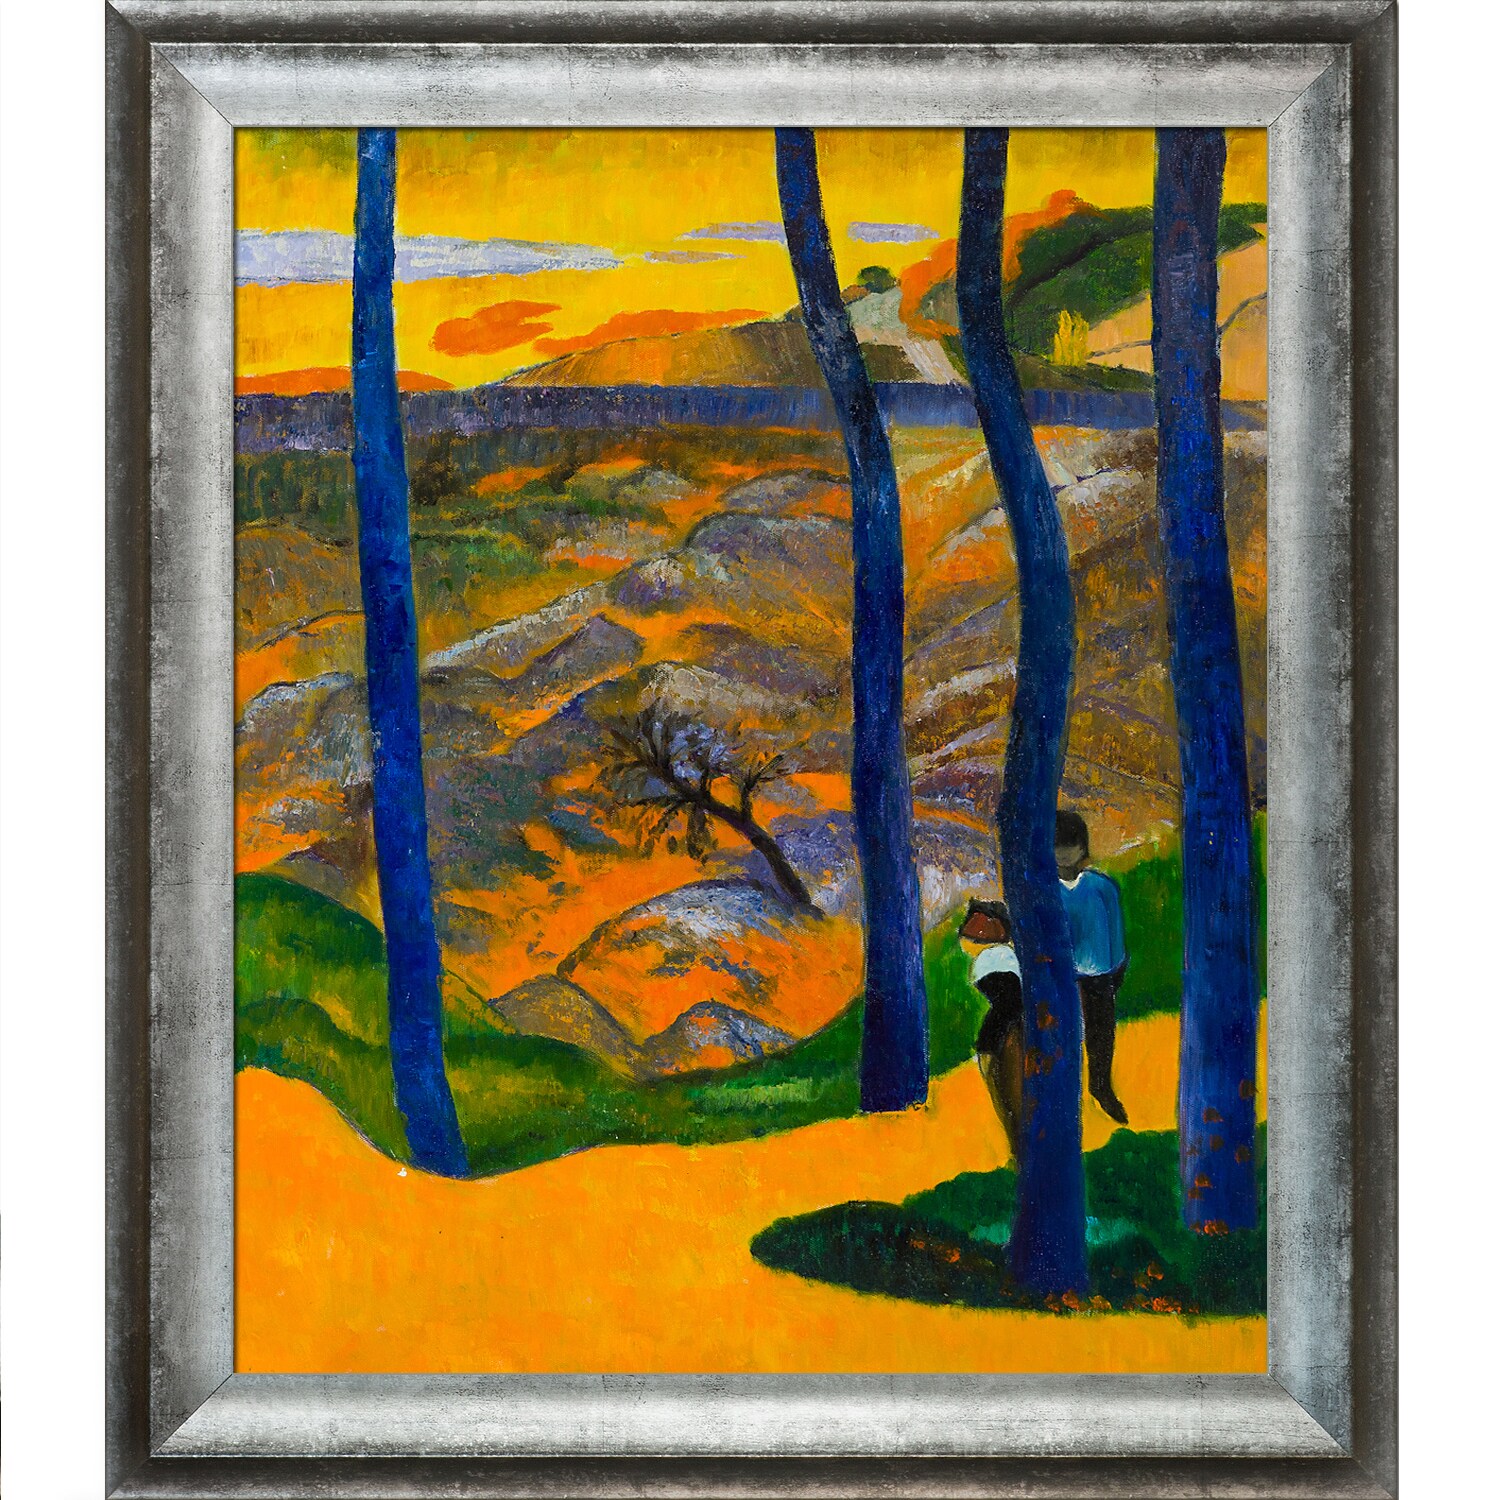 overstockArt Hand Painted Oil Reproduction The Call 1902 by Paul Gauguin with Black Satin Frame